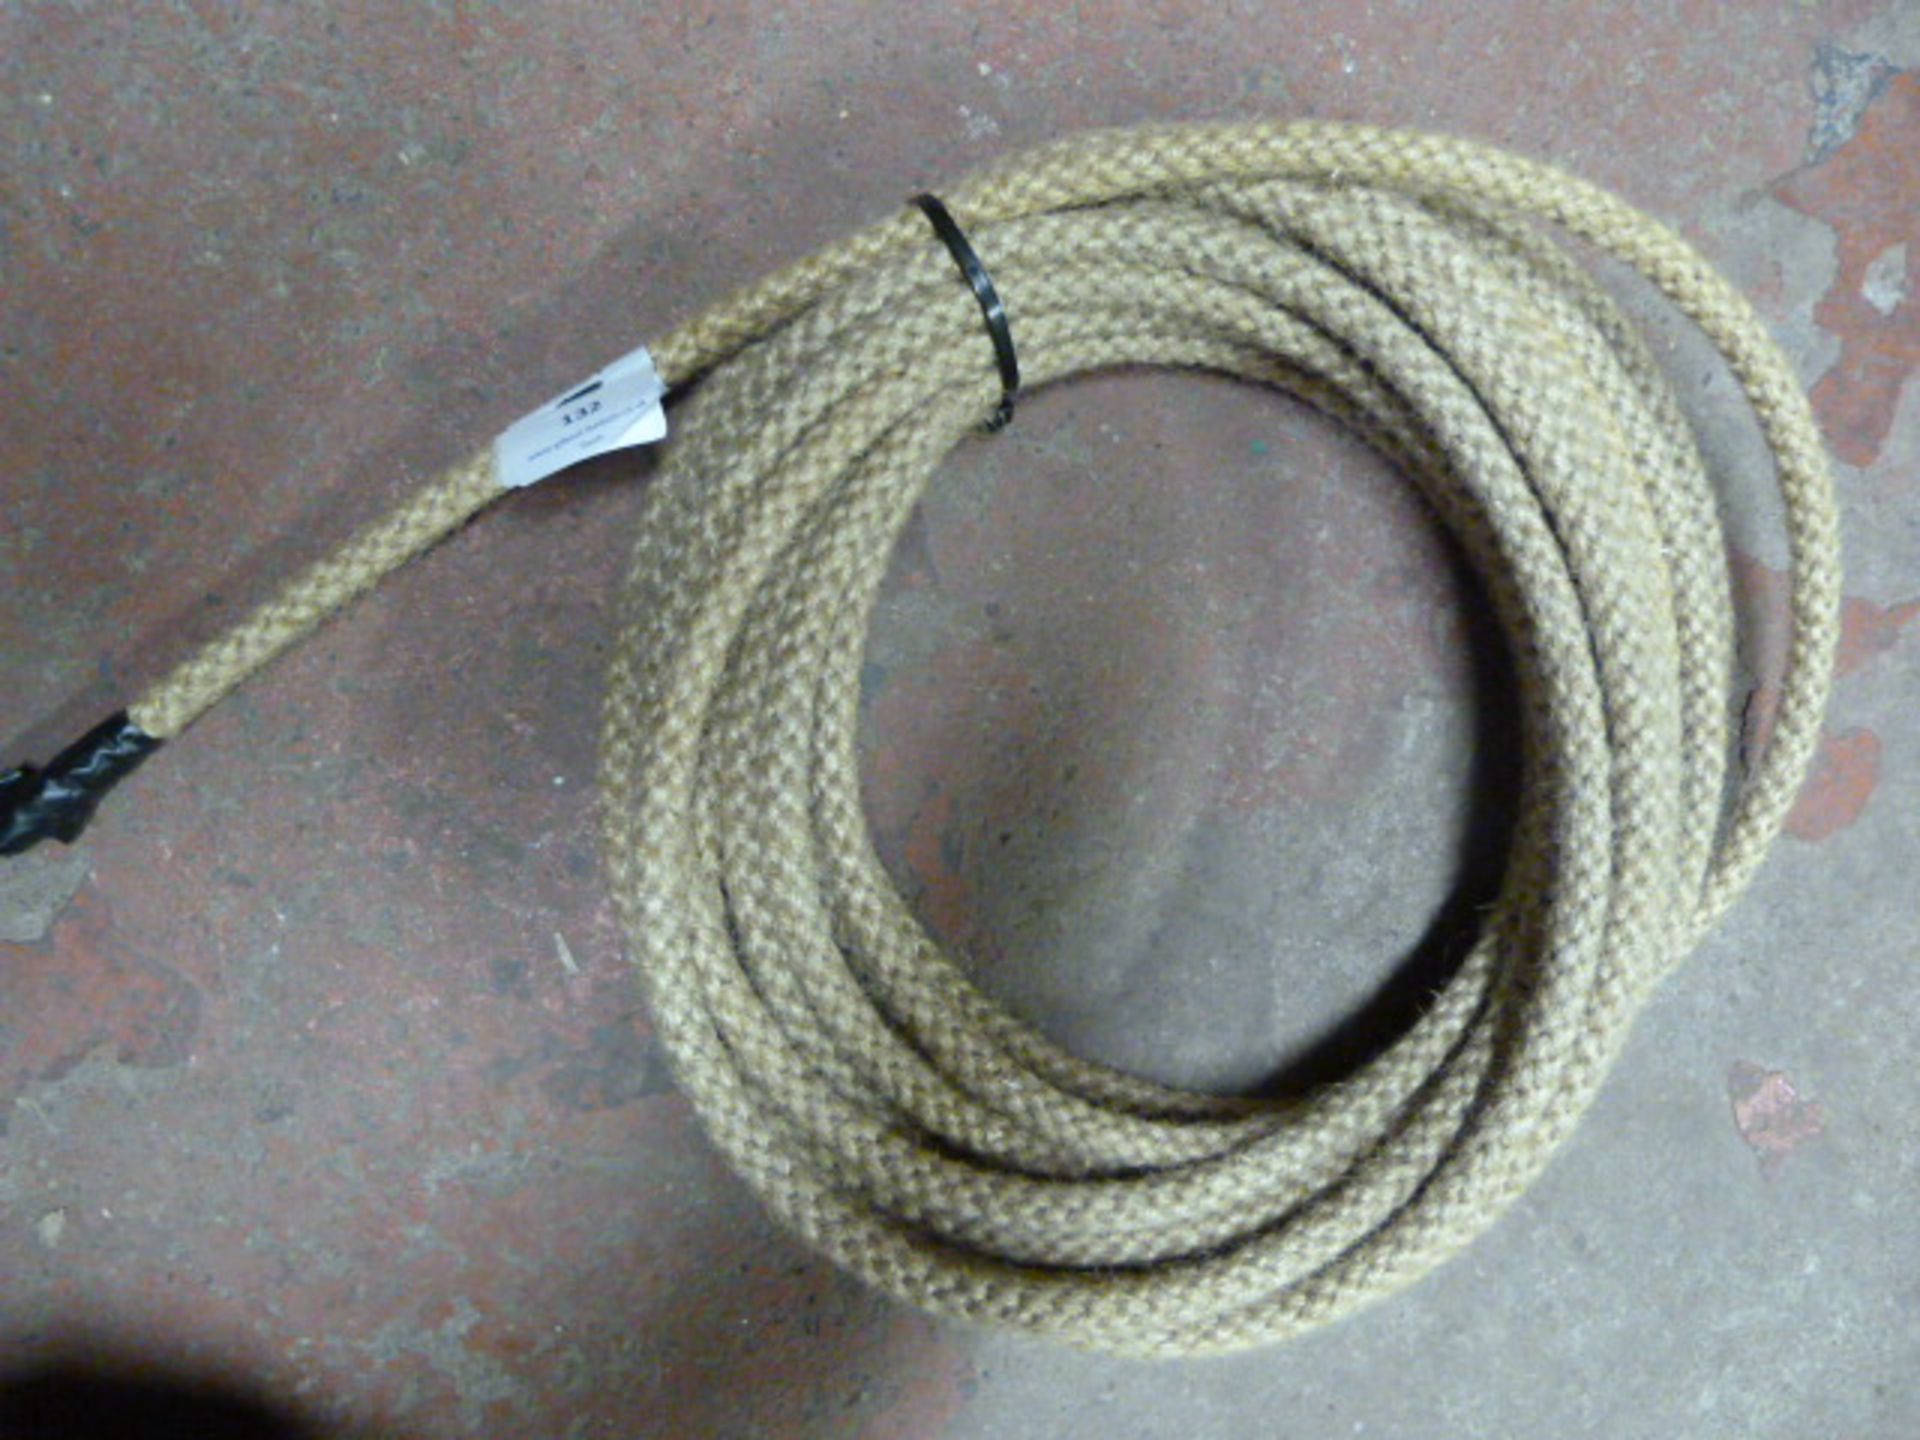 12m Length of Wire Covered with Rope